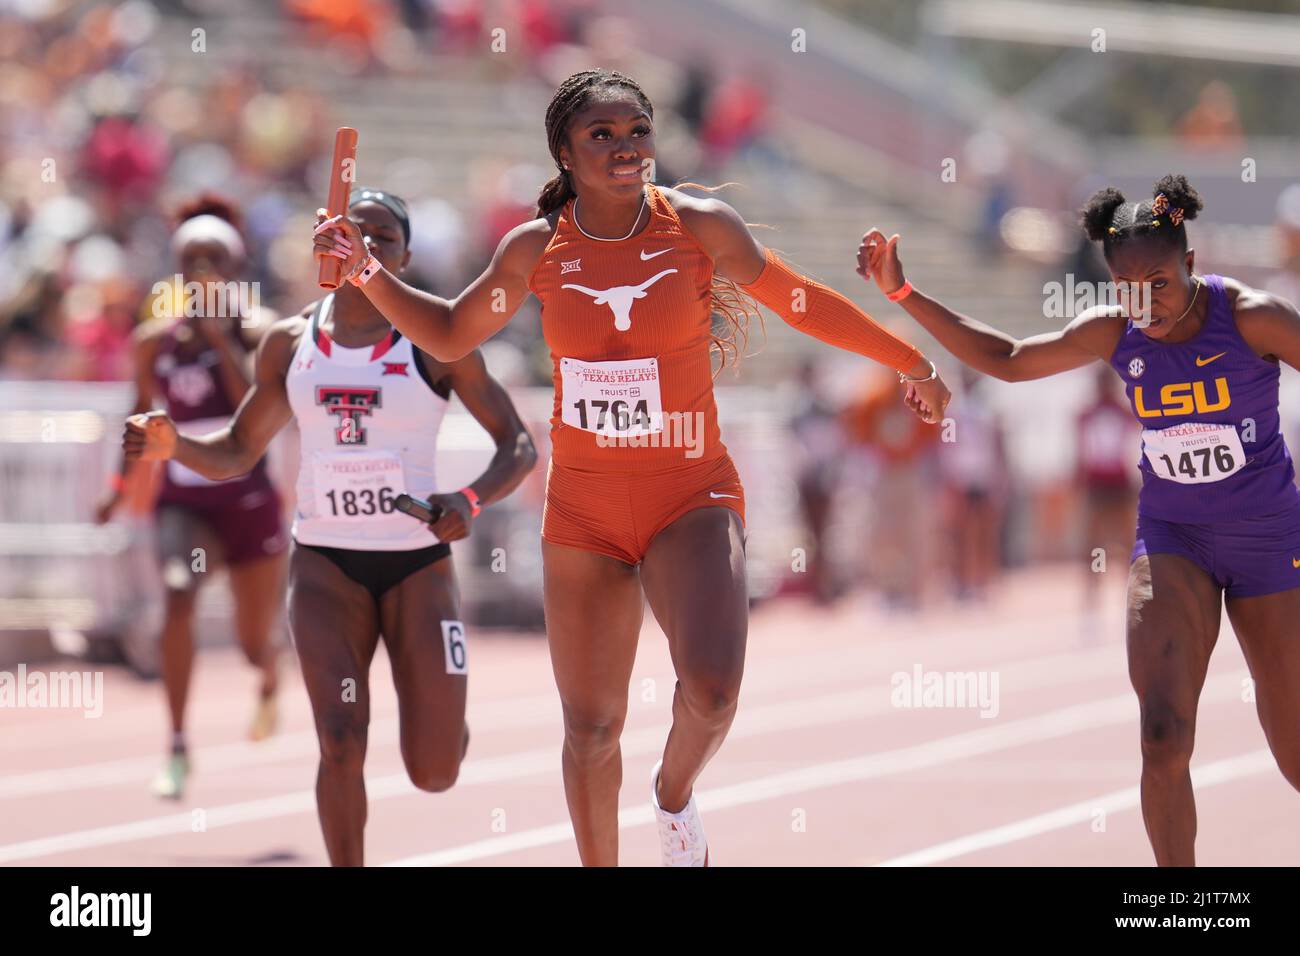 Kynnedy Flannel of Texas (1764) defeats Favour Ofili of LSU (1476) on the anchor leg of the women's 4x100m relay, 42.83 to 42.97, during the 94th Clyd Stock Photo